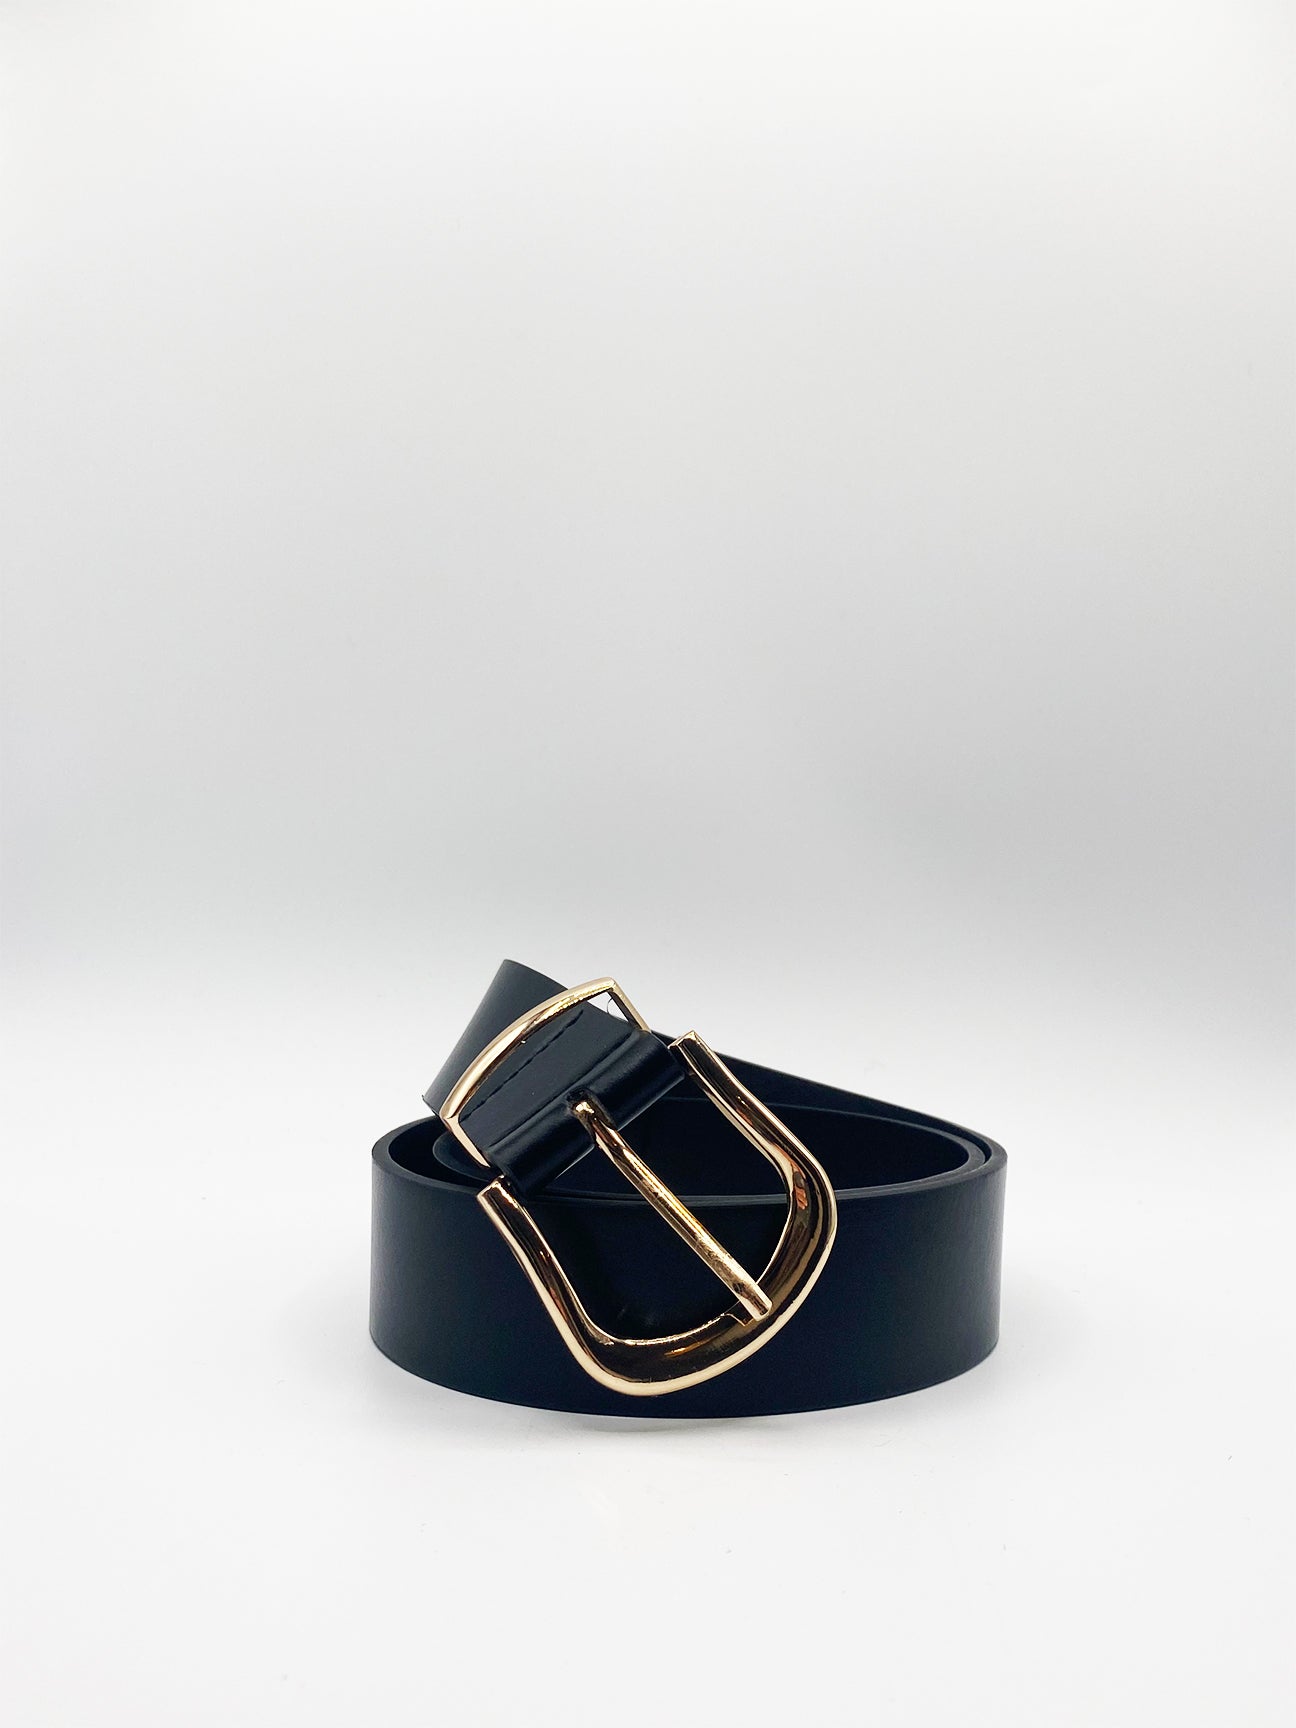 PU Leather Belt With Gold Metal Buckle